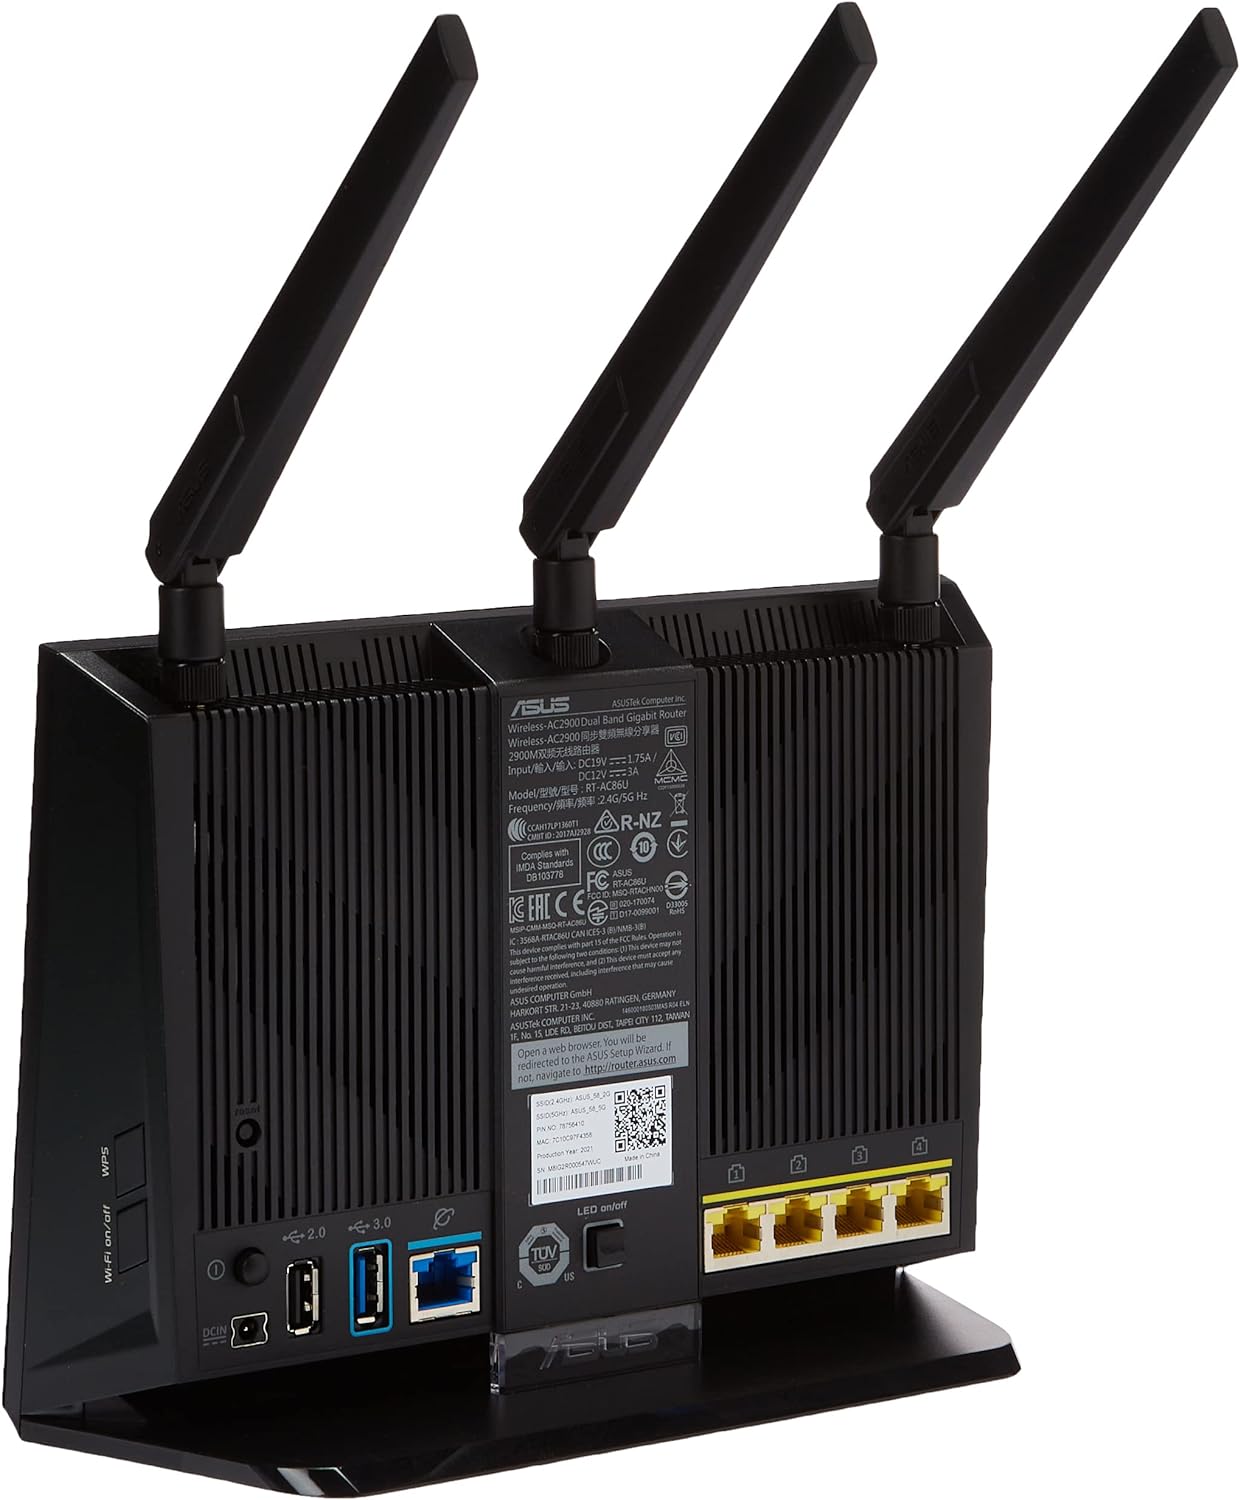 High-speed AC2900 wireless router for lag-free gaming and 4K streaming 4716659214199E